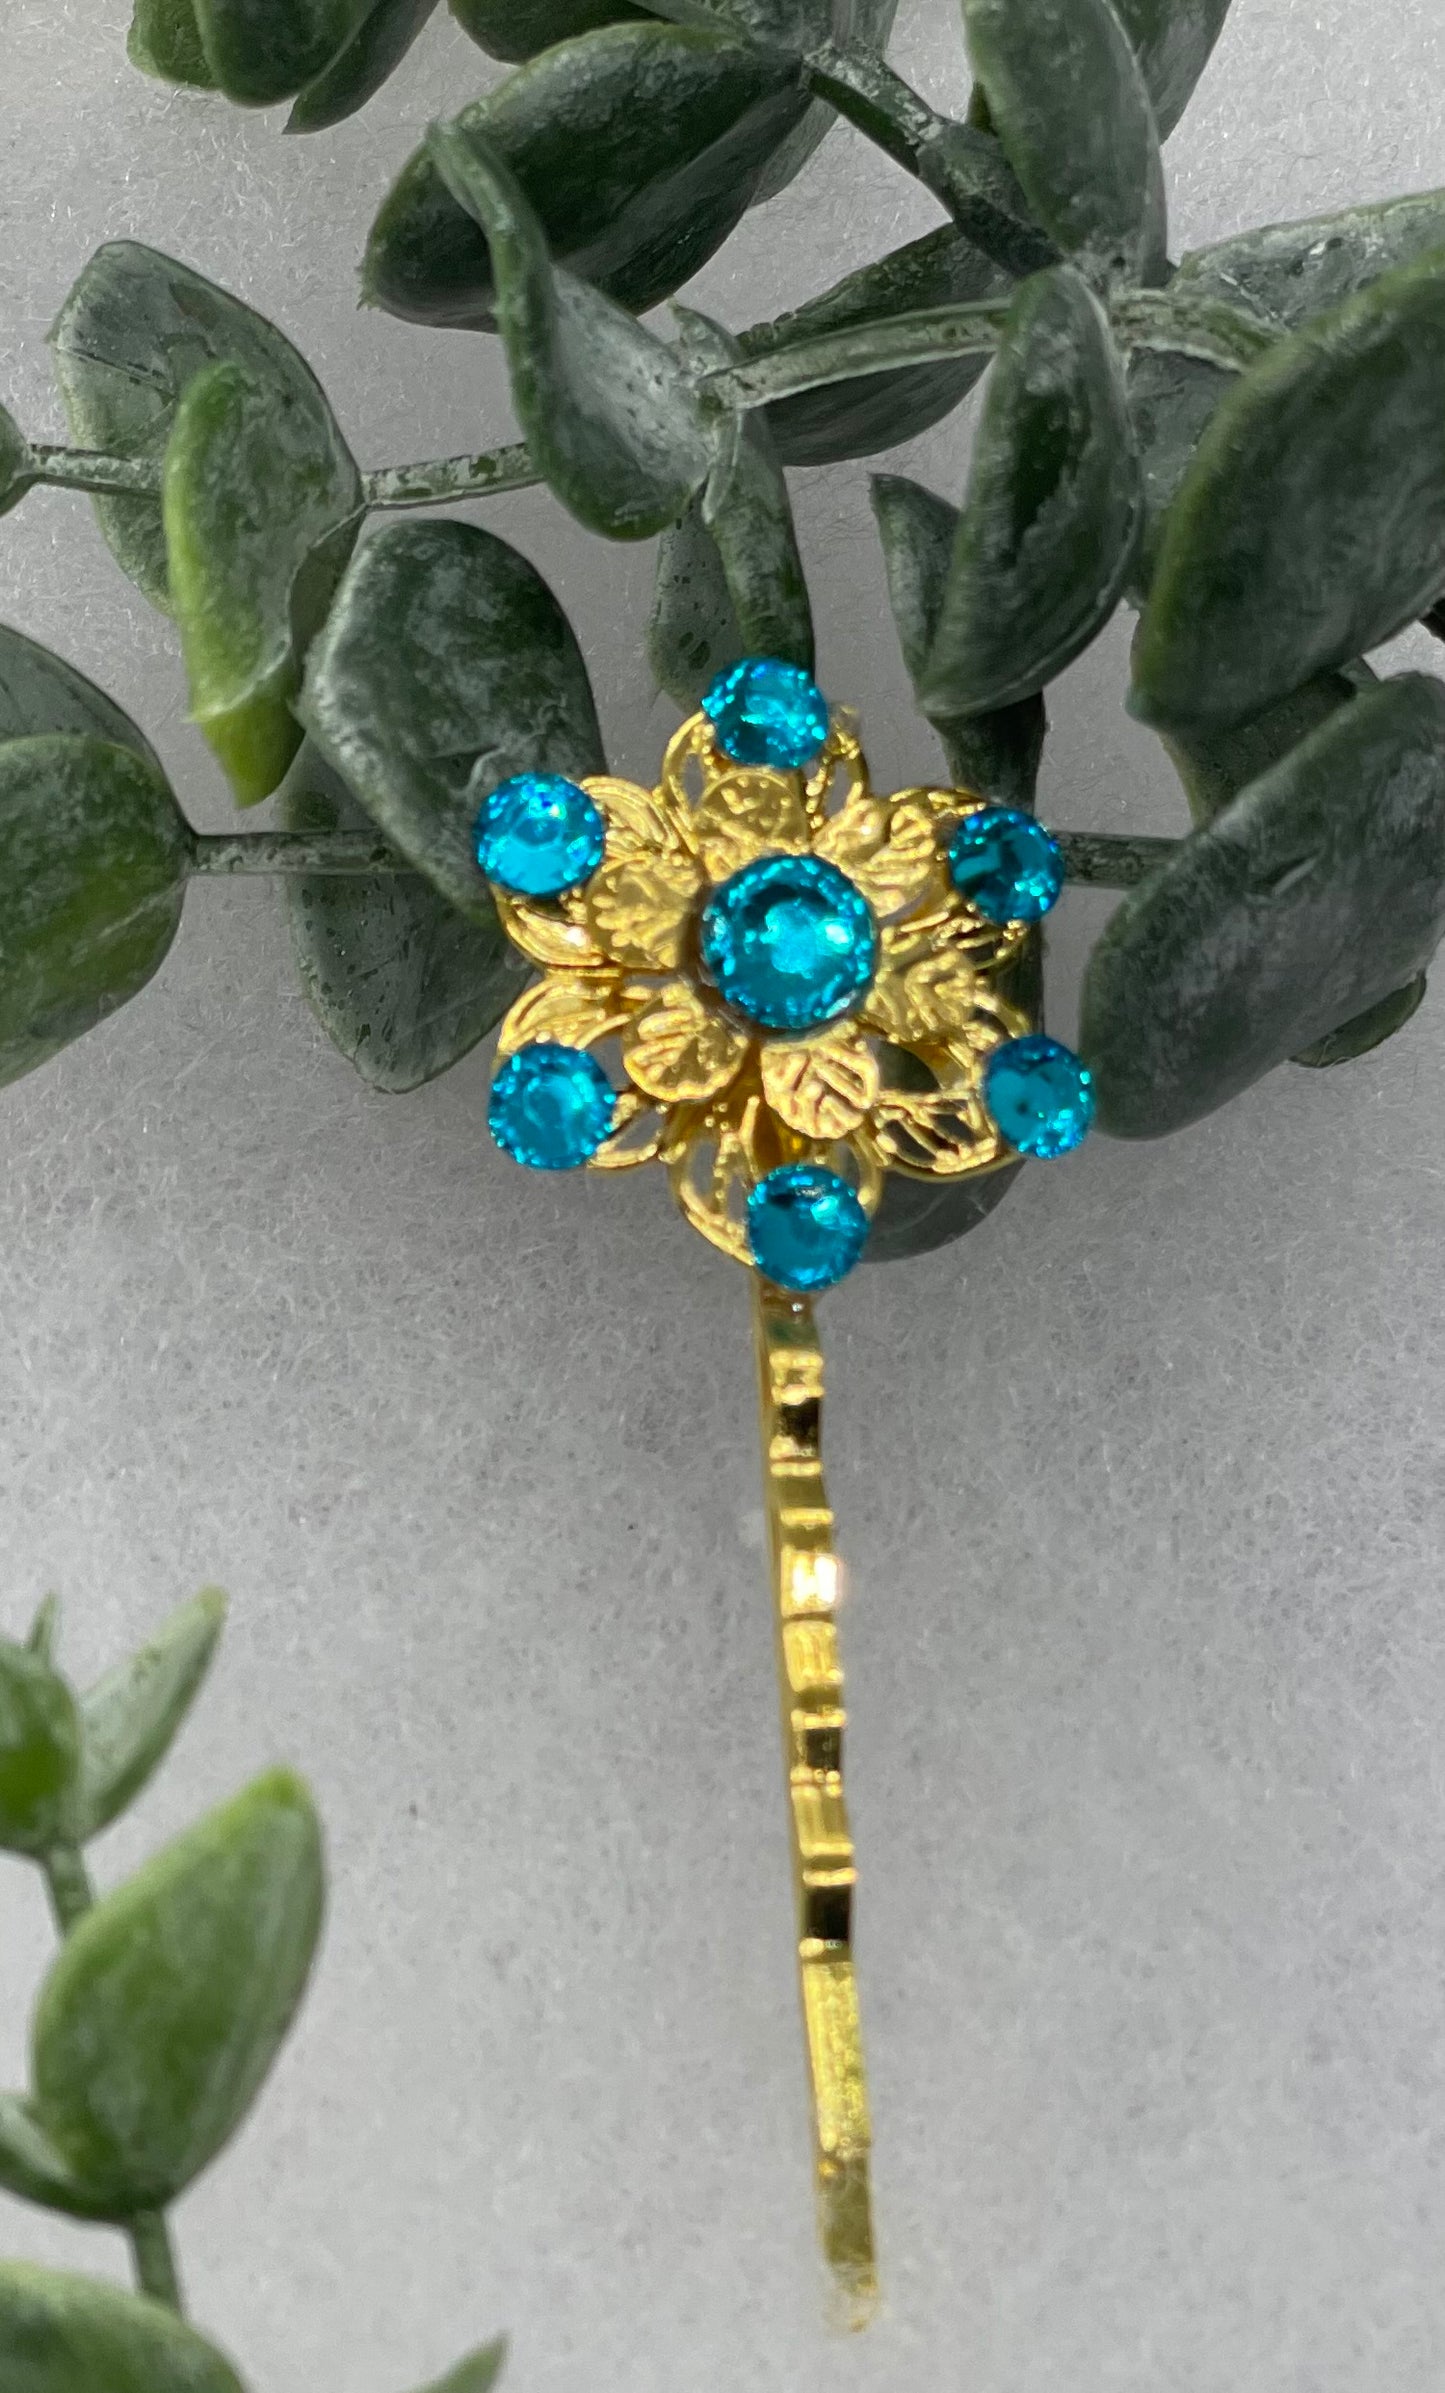 Teal crystal Gold Antique vintage Style approximately 3.0” flower hair pin wedding engagement bride princess formal hair accessory accessories